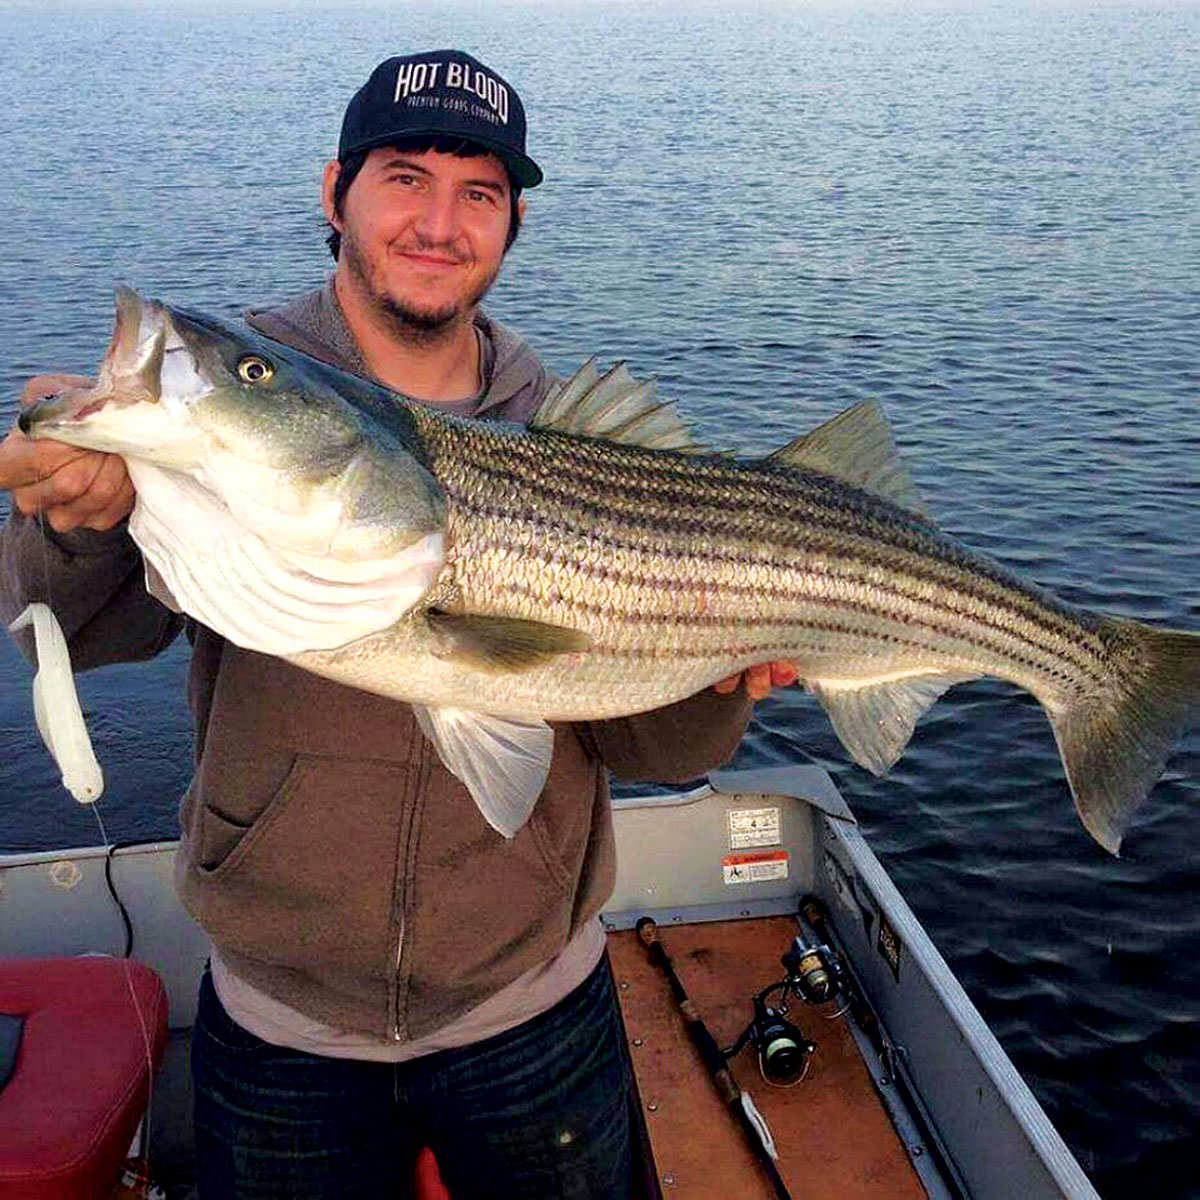 Large Swimming Lures for Striped Bass Fishing